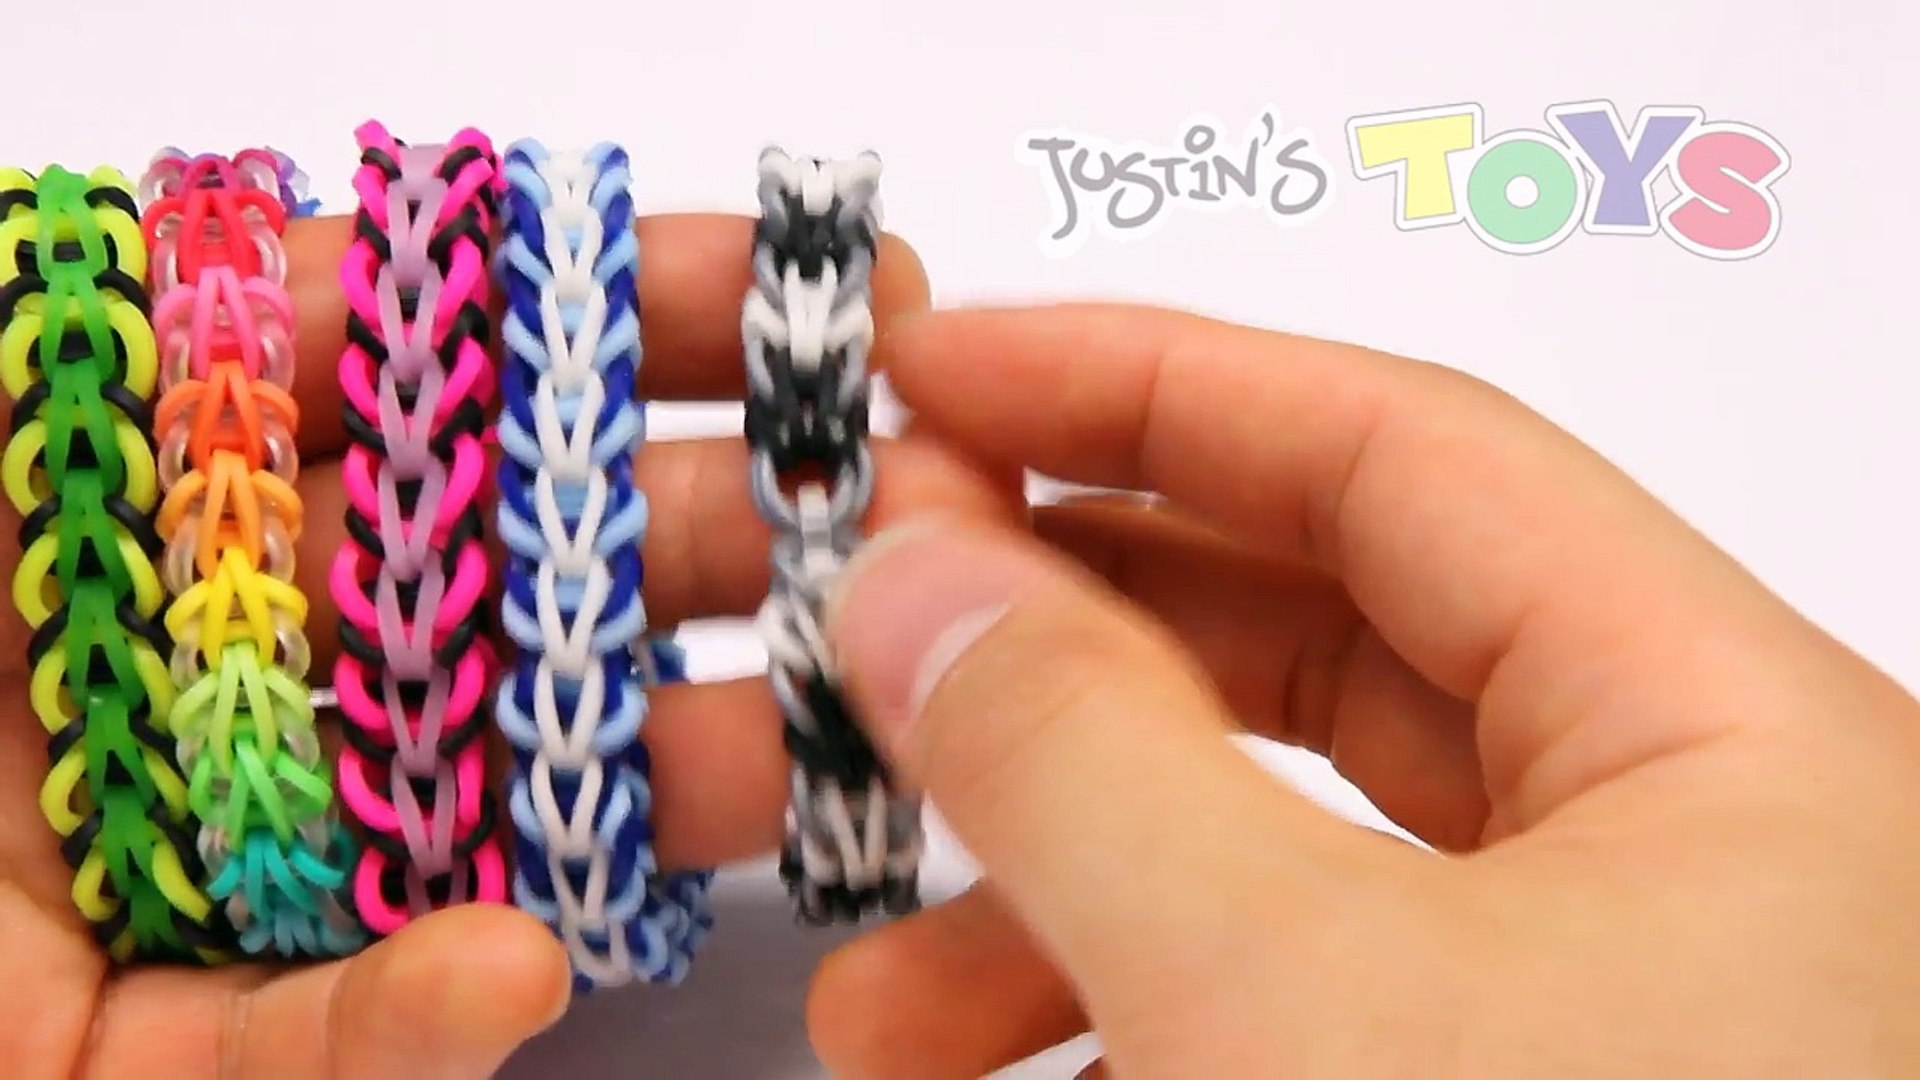 How to make loom bands fishtail loom band bracelet - video Dailymotion